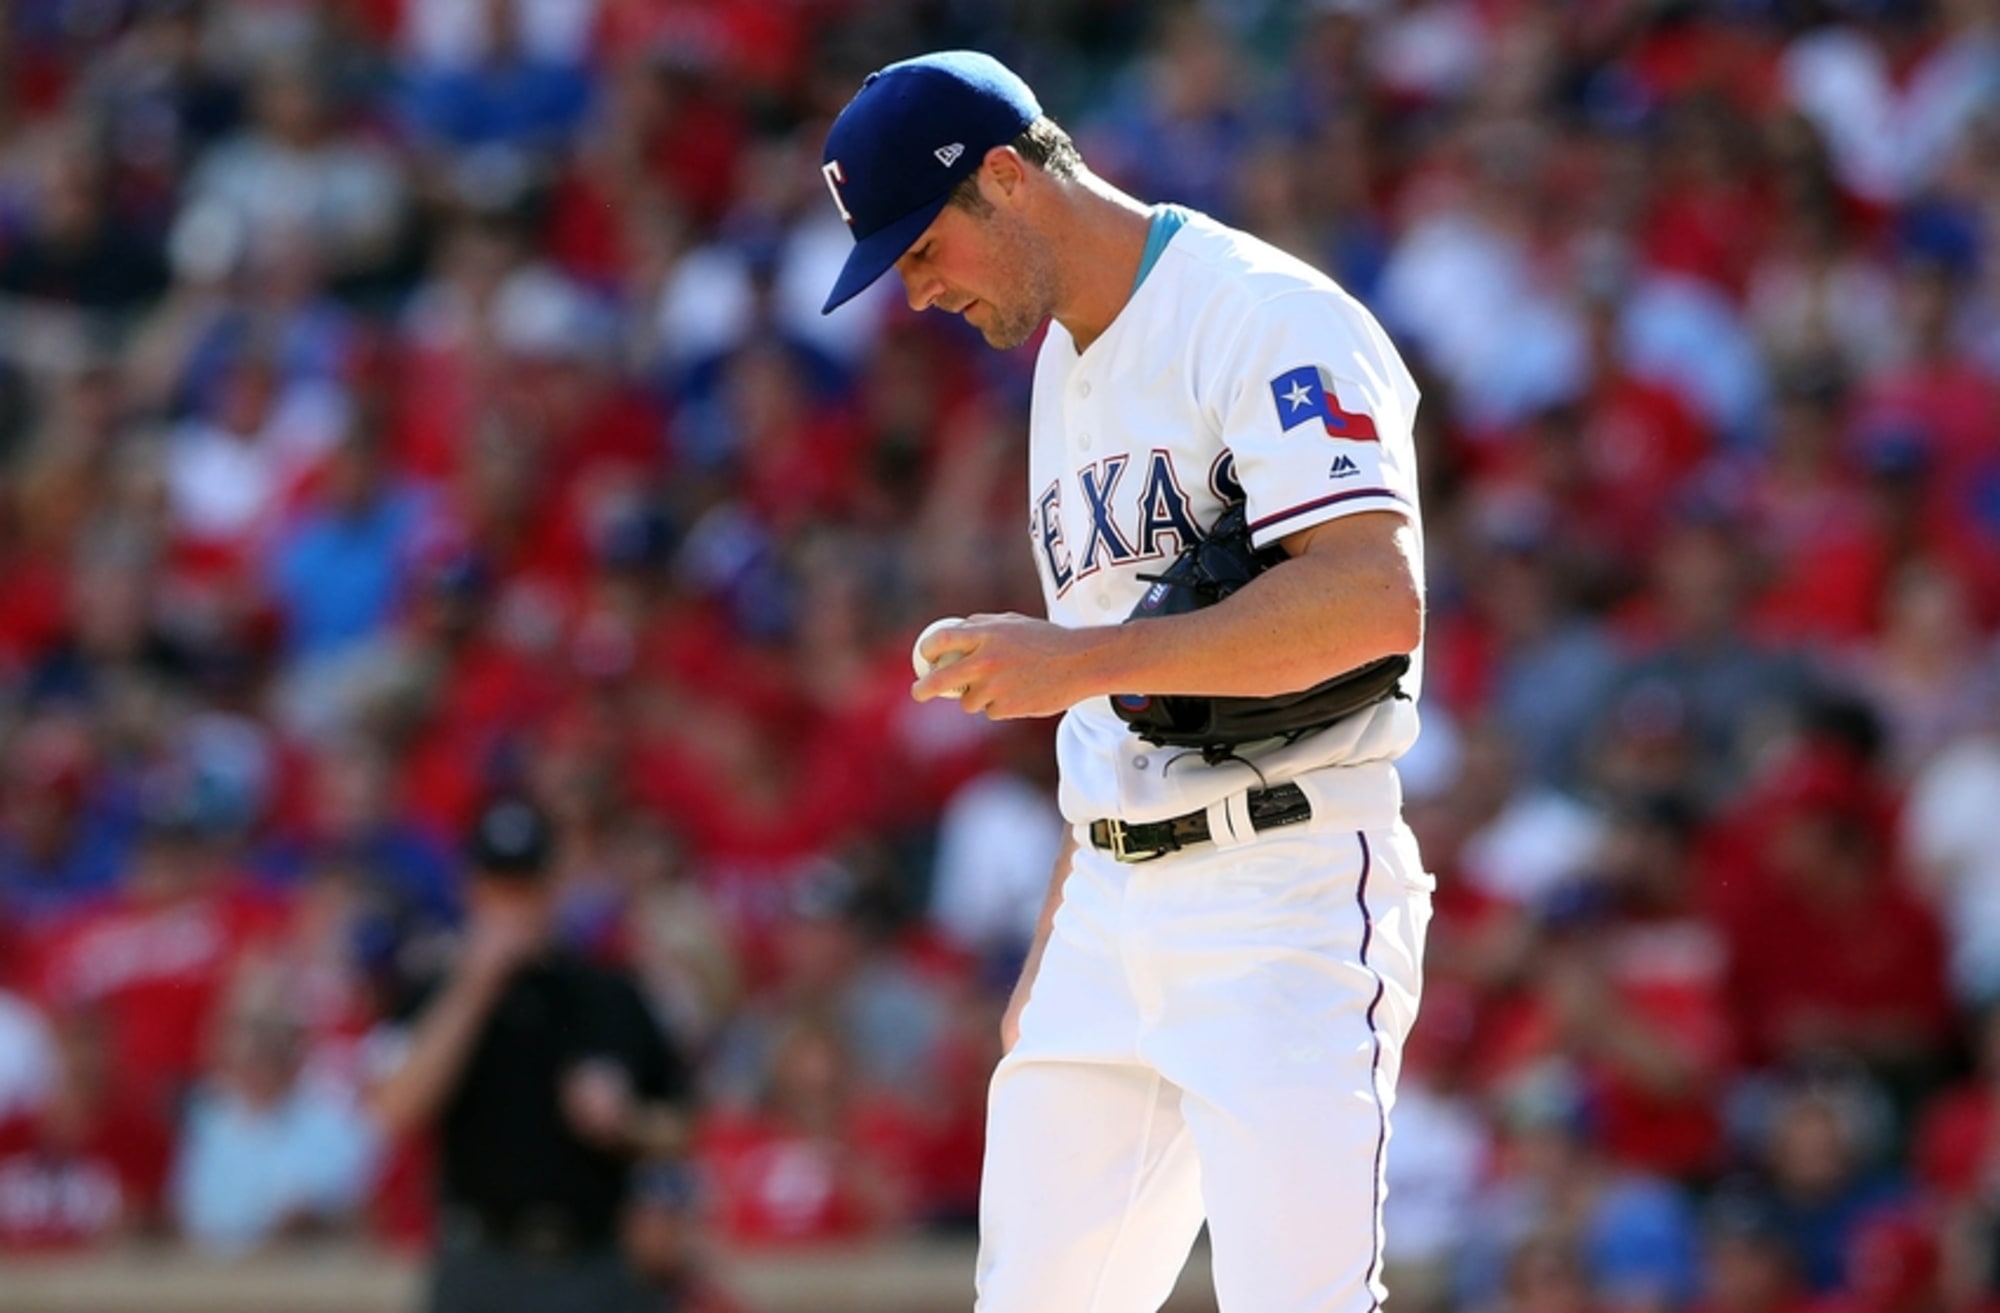 A history of the feud between the Blue Jays and the Texas Rangers